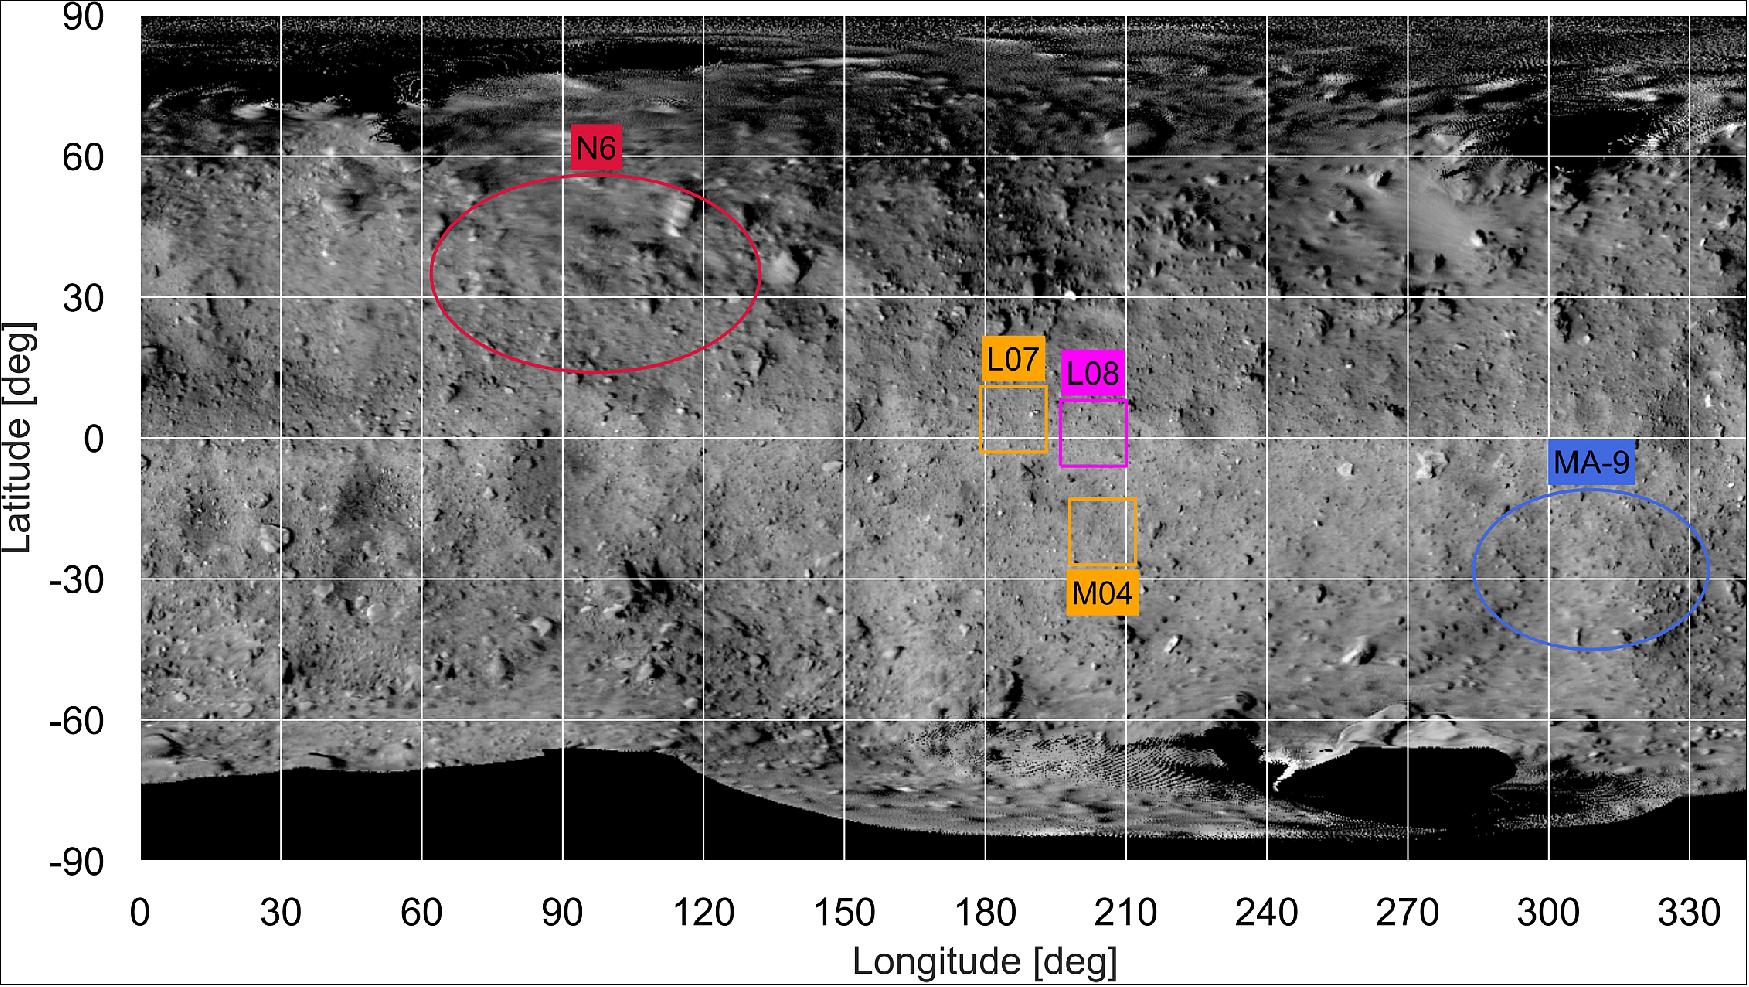 Figure 97: The MASCOT lander is set to land on the blue-marked ellipse MA-9 on Ryugu. The Japanese Hayabusa-2 probe will approach the asteroid surface at location L07 (L08 and M04 are substitute landing sites), where it will take samples. The MINERVA rovers will be dropped off at the red-marked landing site N6 (image credit: JAXA, University of Tokyo & collaborators)